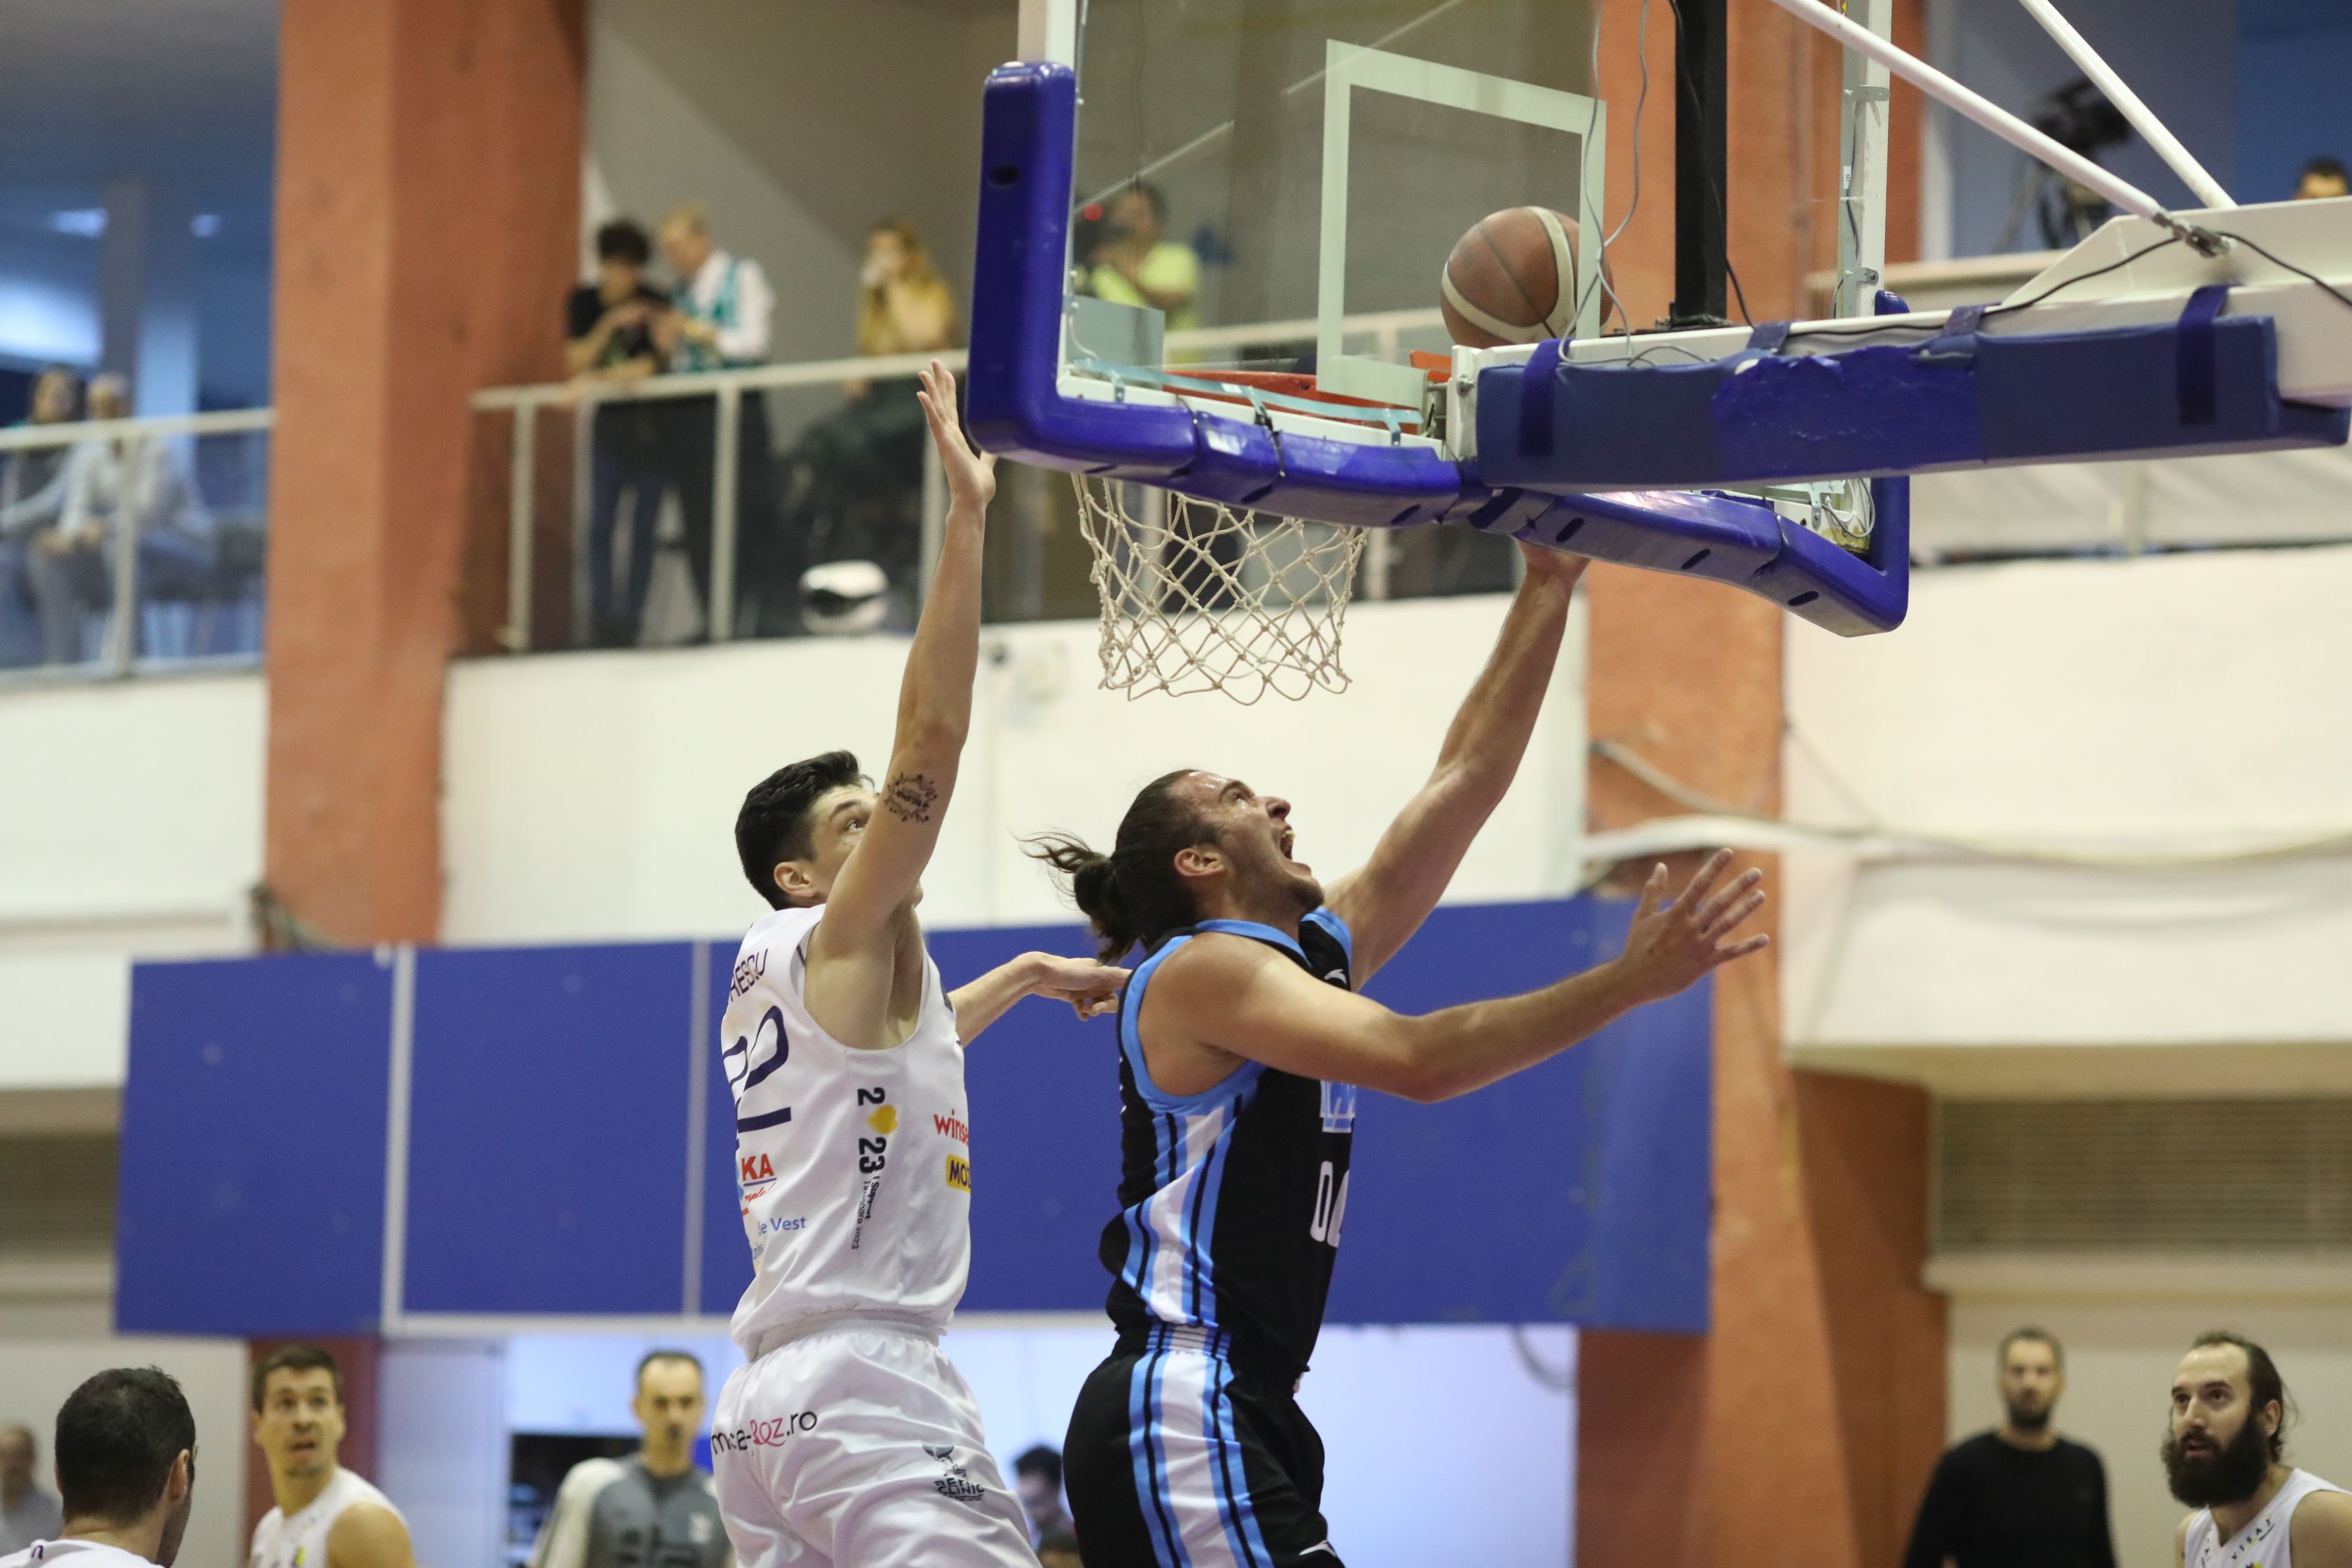 Timisoara on its way to the Final Four